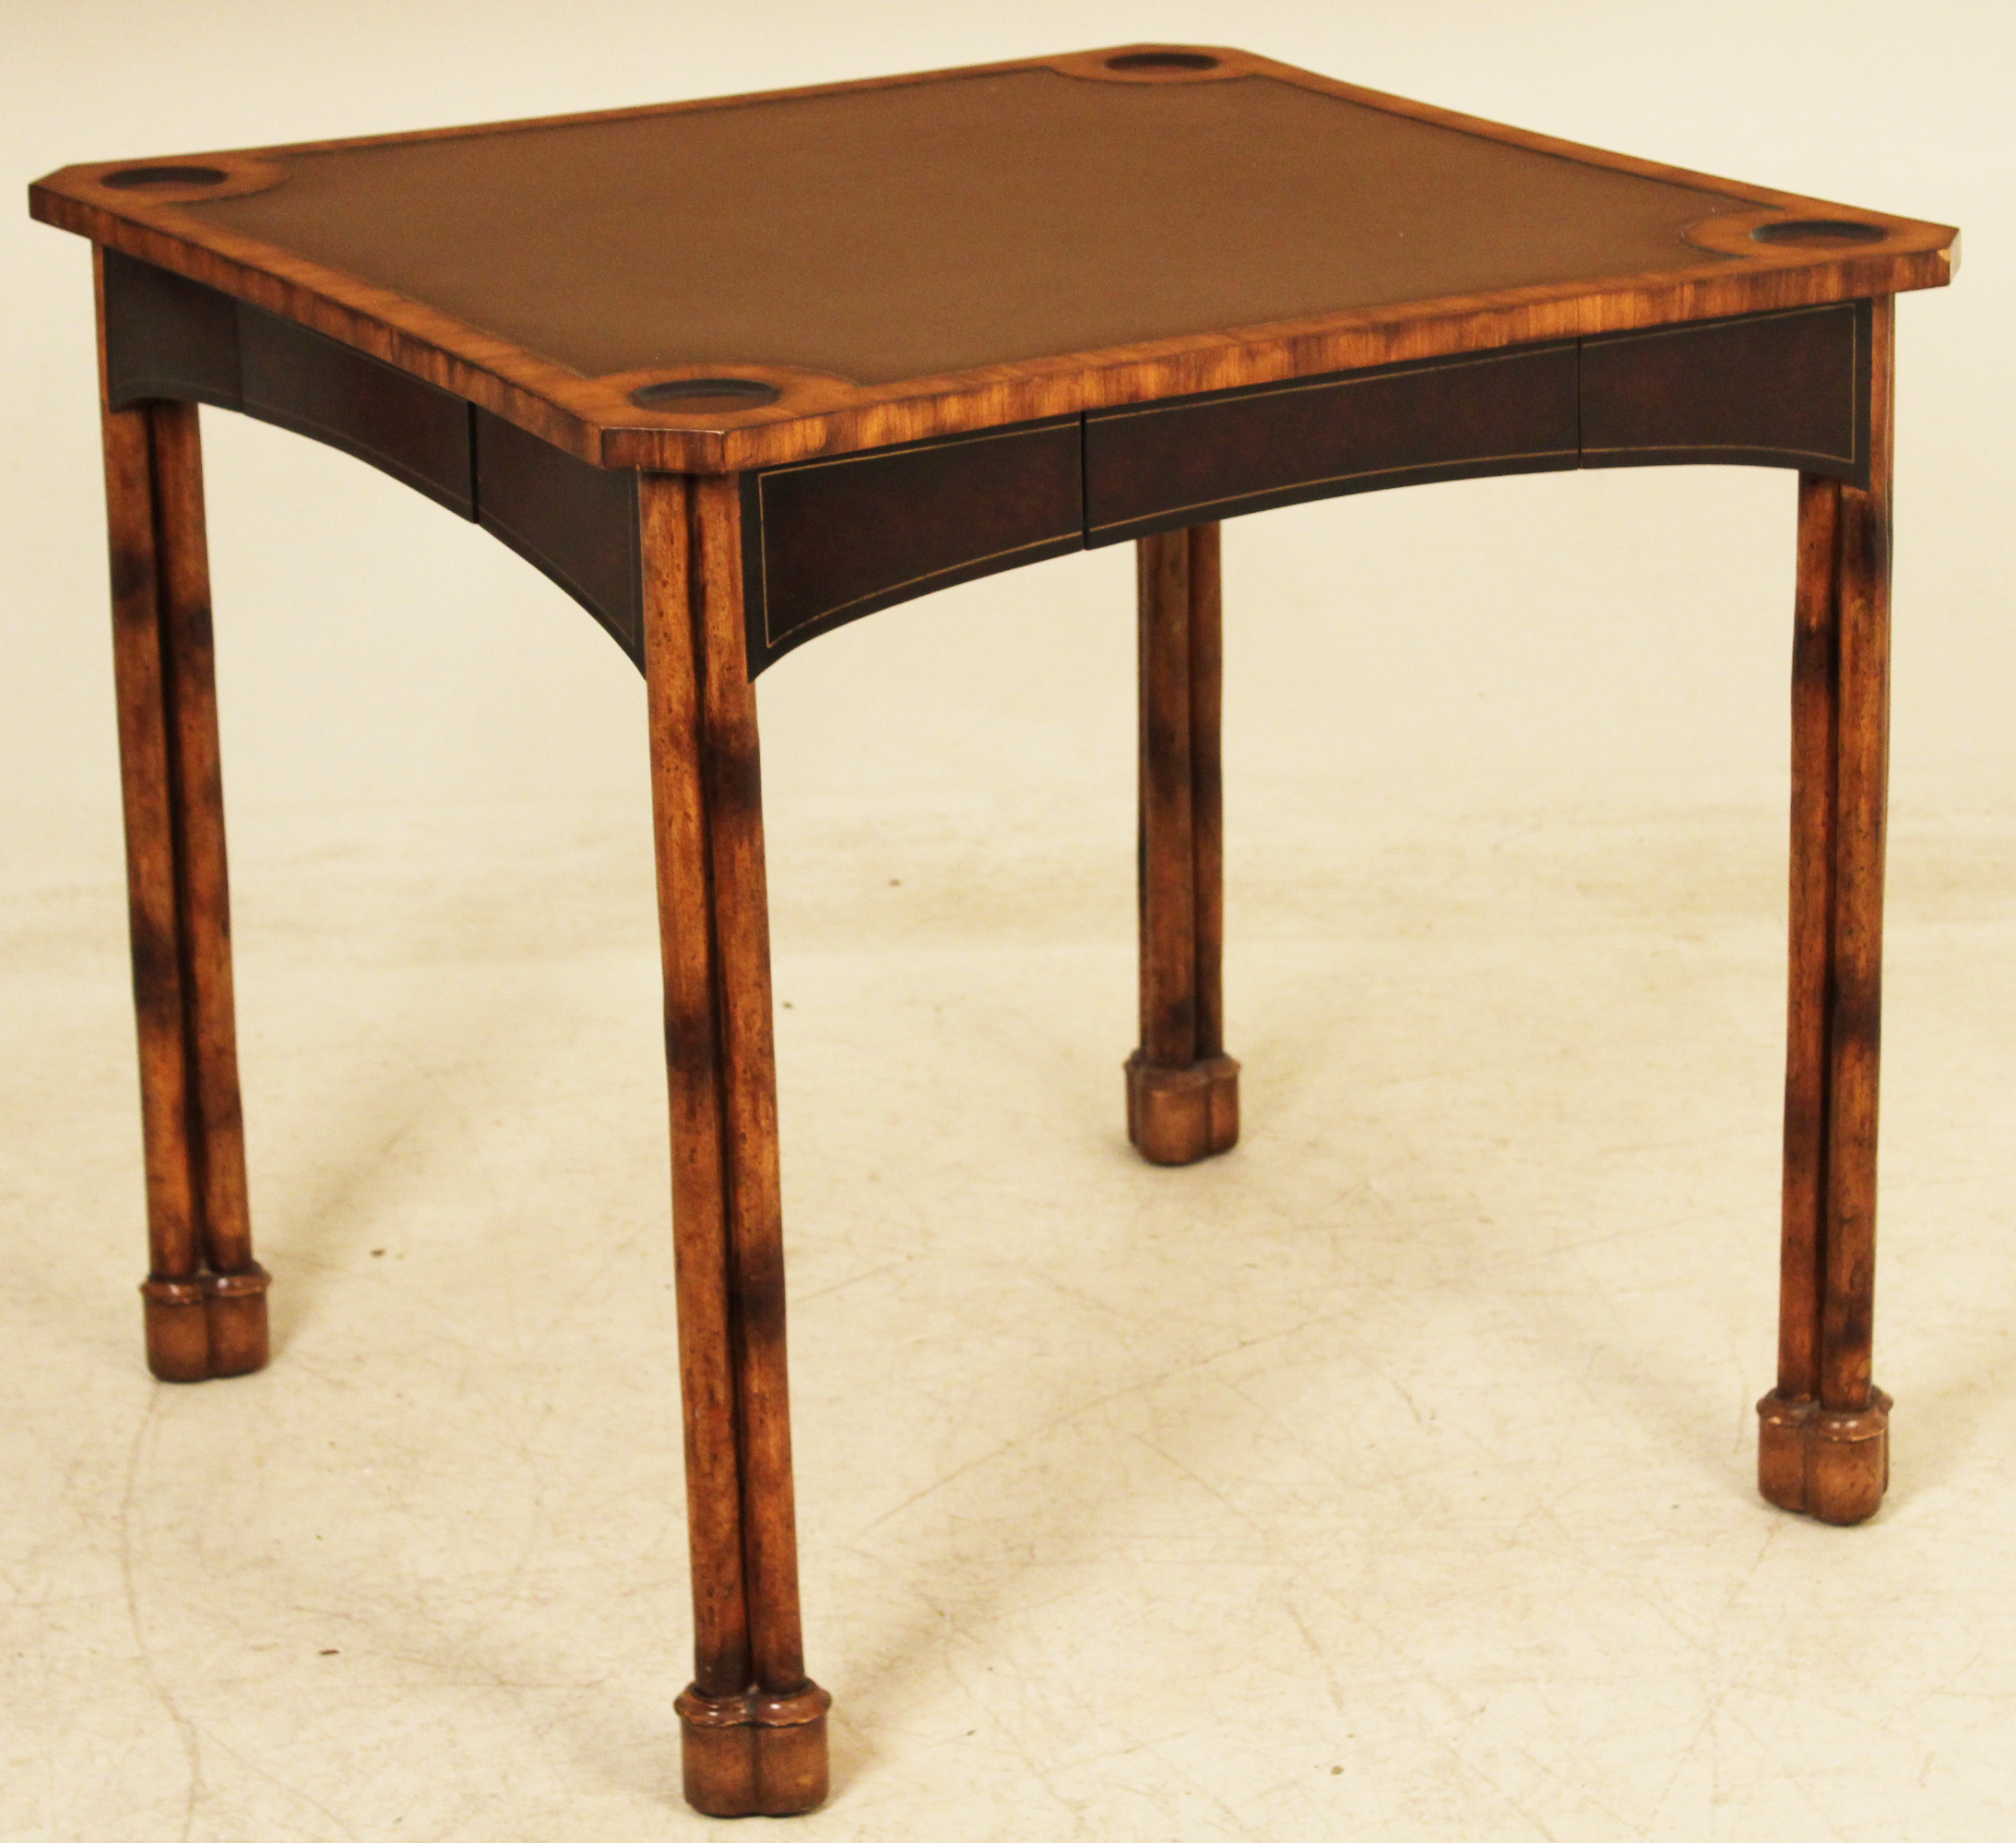 LEATHER TOP GAMES TABLE BY THEODORE